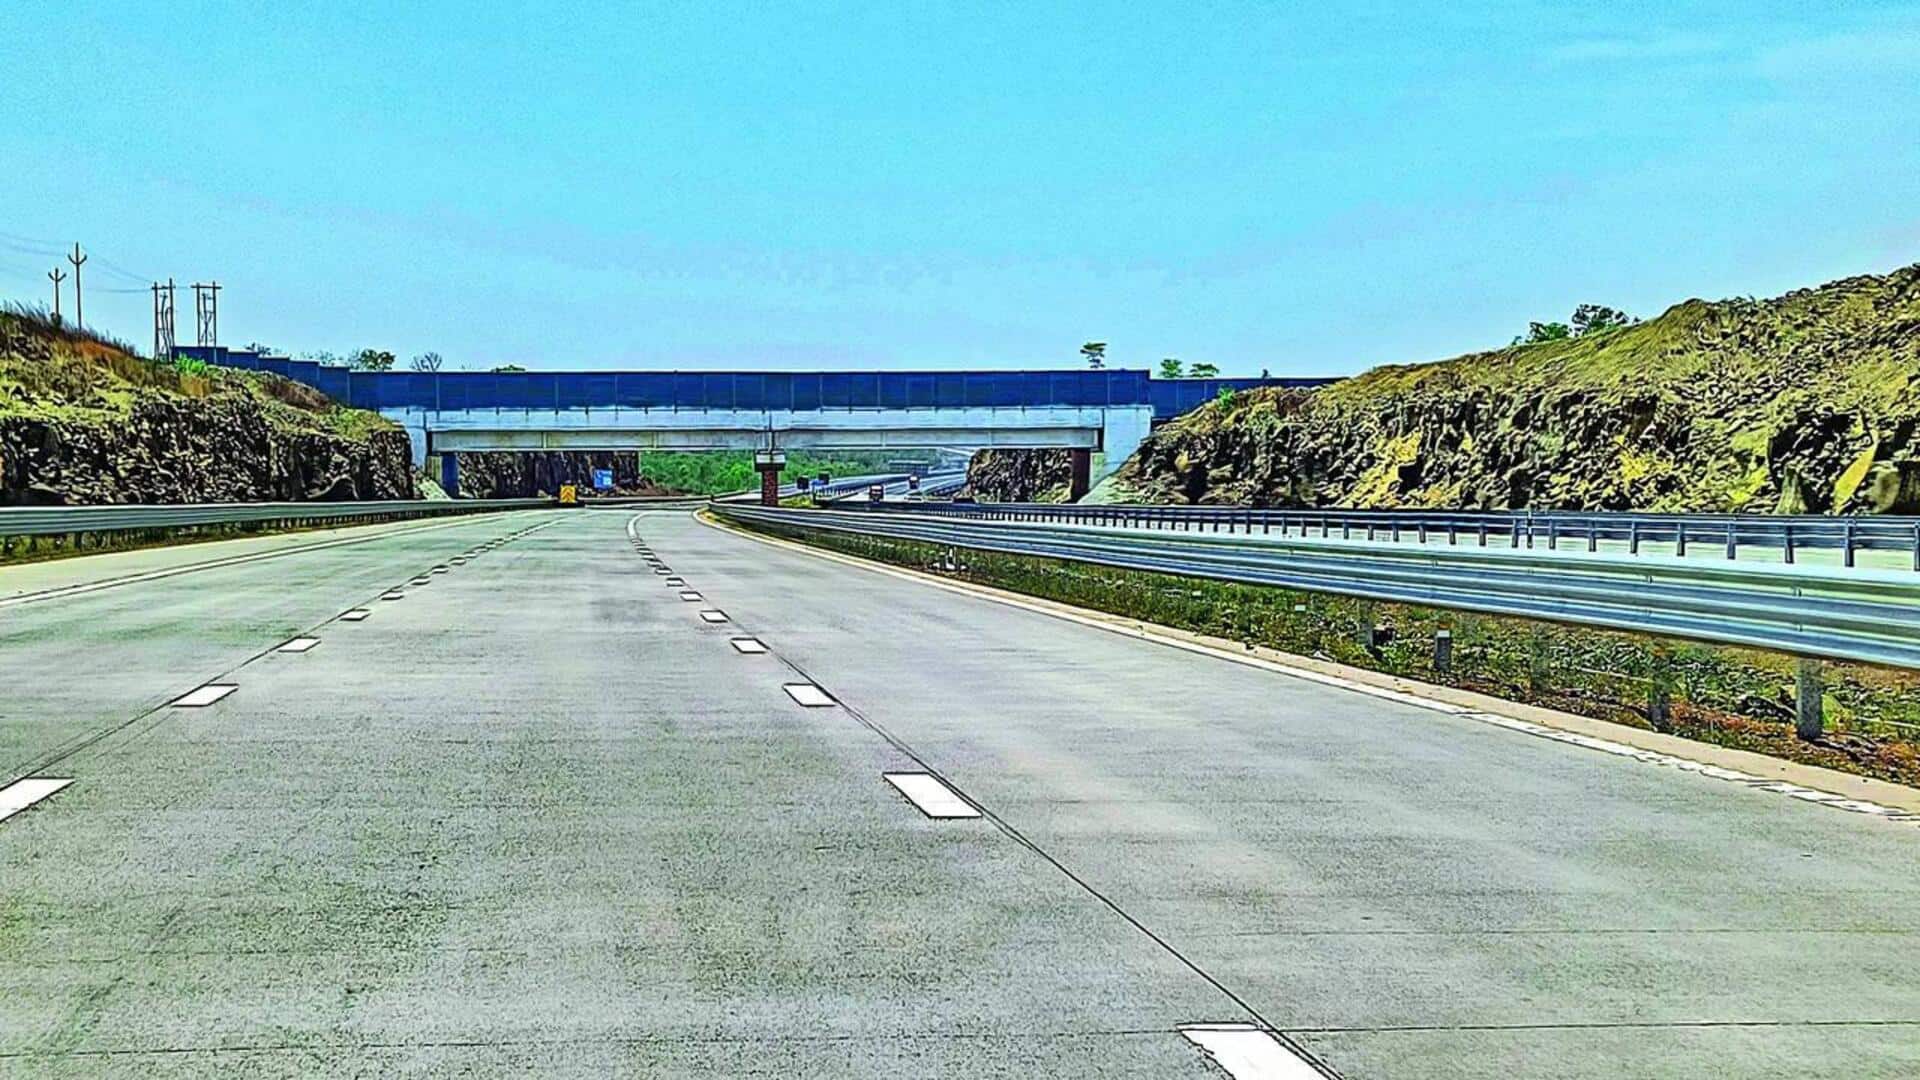 Indian highways, city roads may soon have dedicated two-wheeler lanes